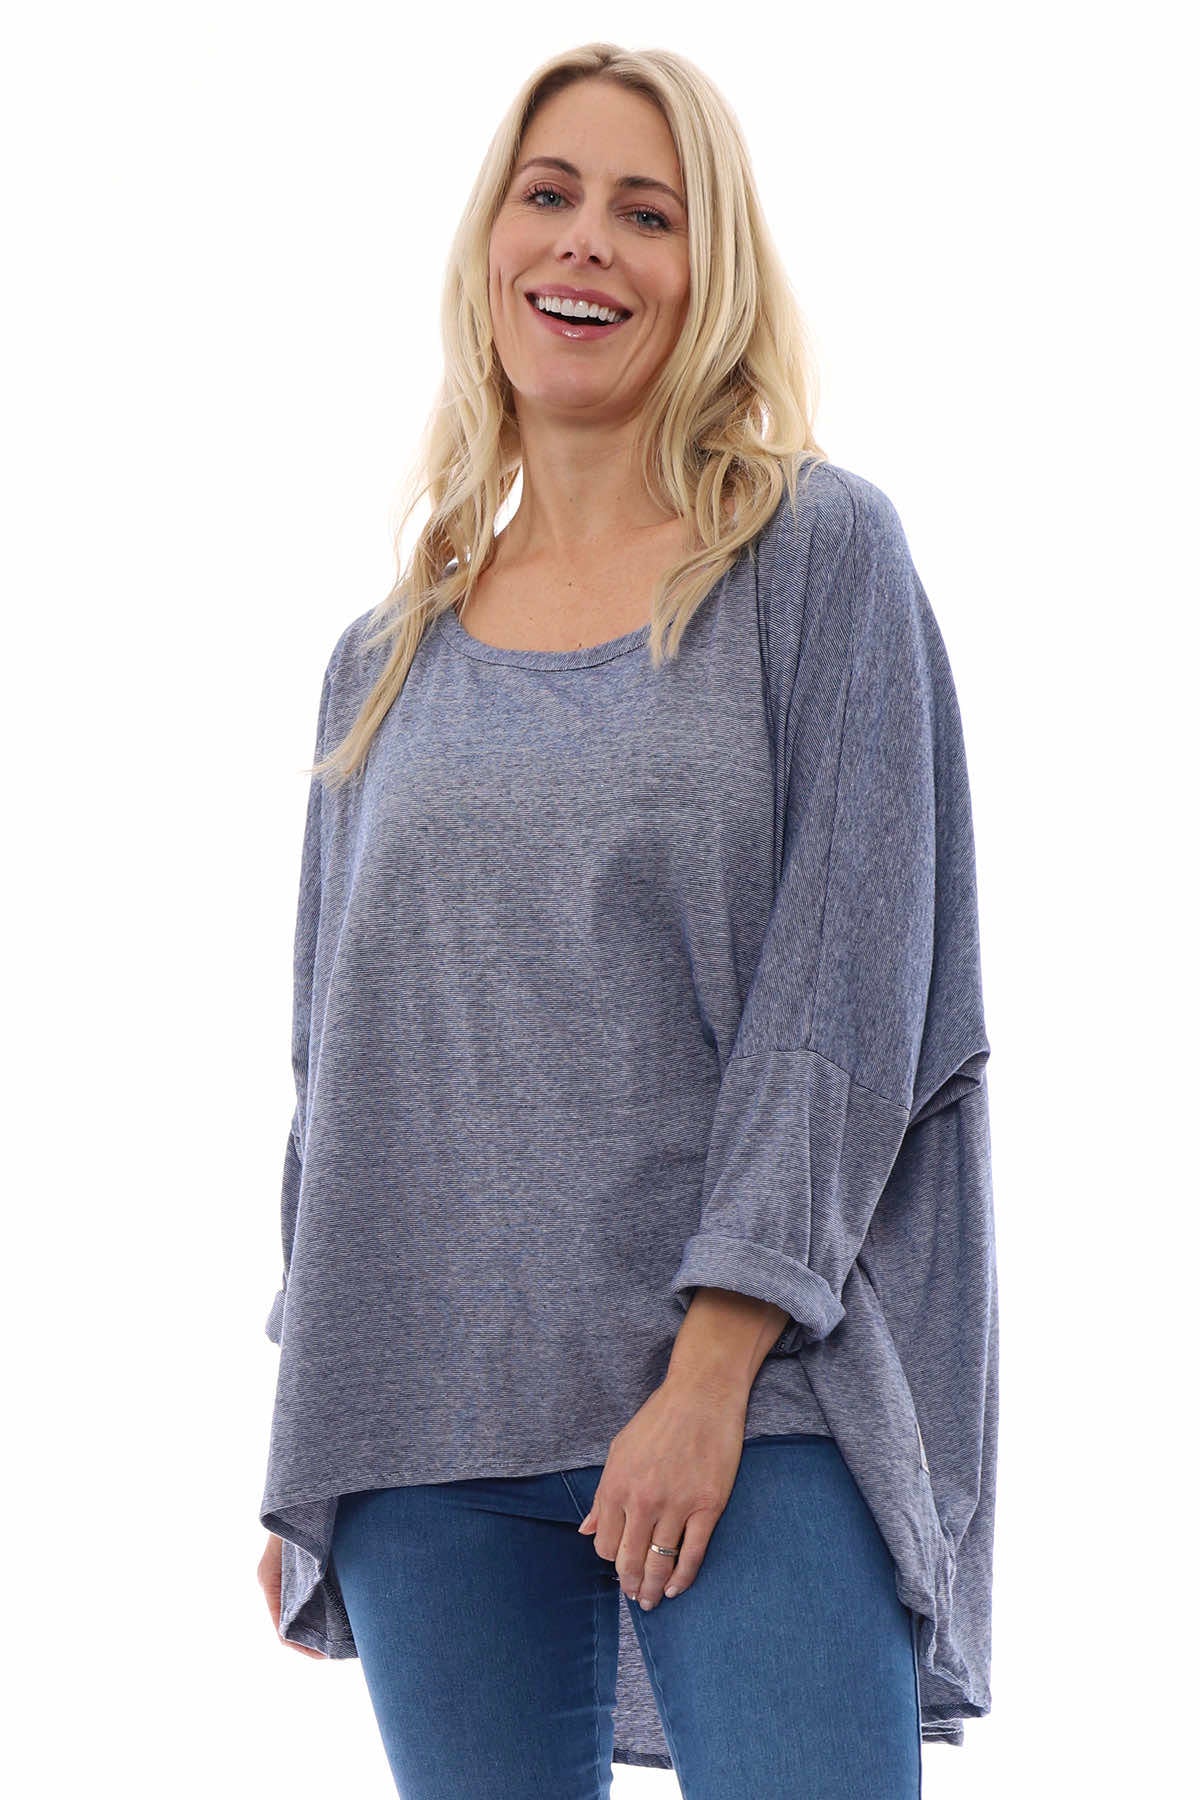 Made With Love Jenny Top Blue Grey